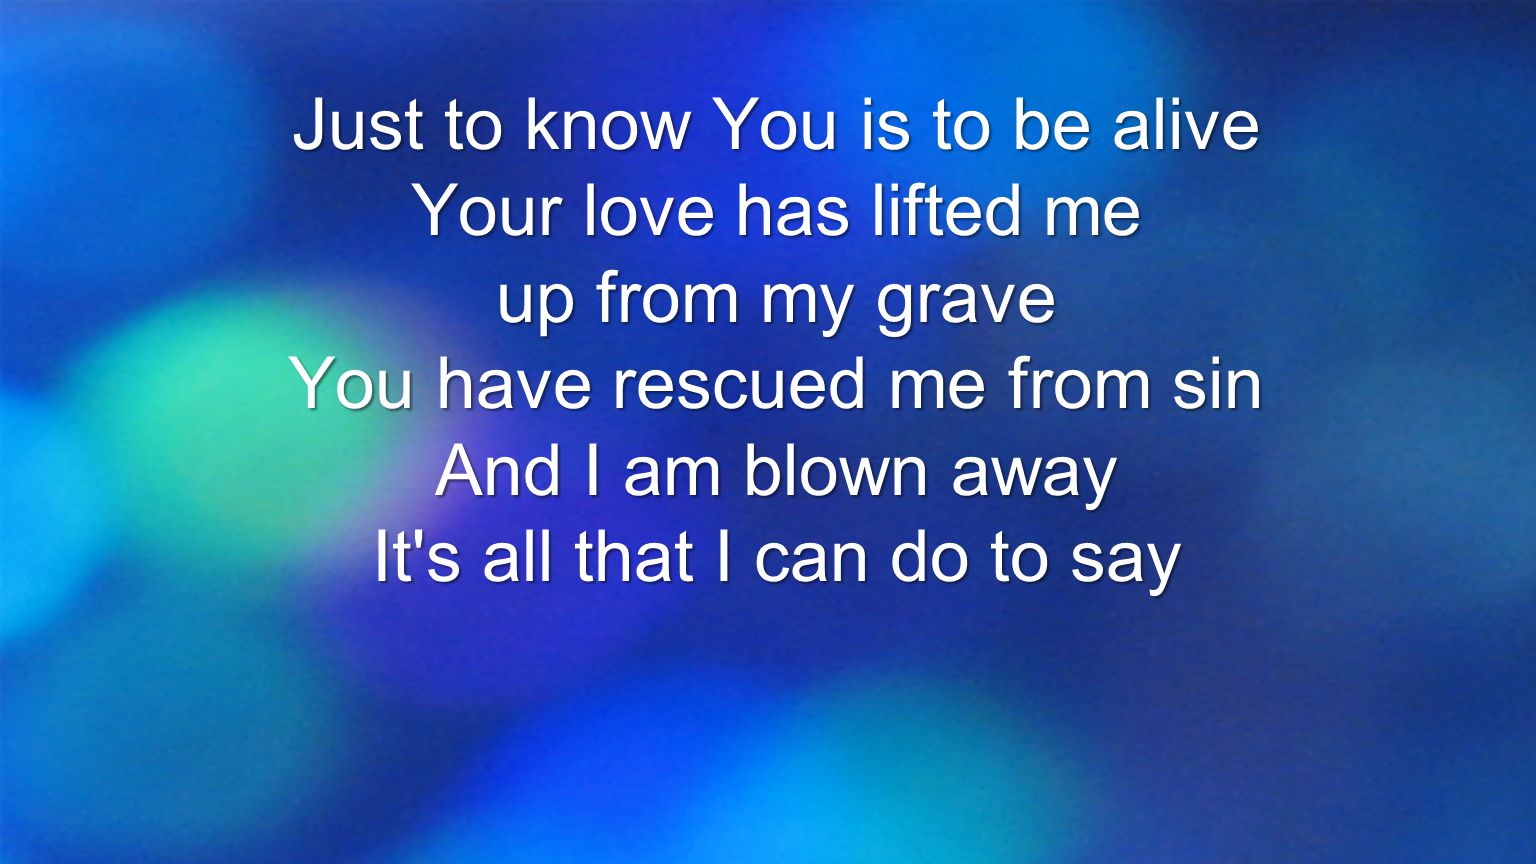 Just to know You is to be alive Your love has lifted me